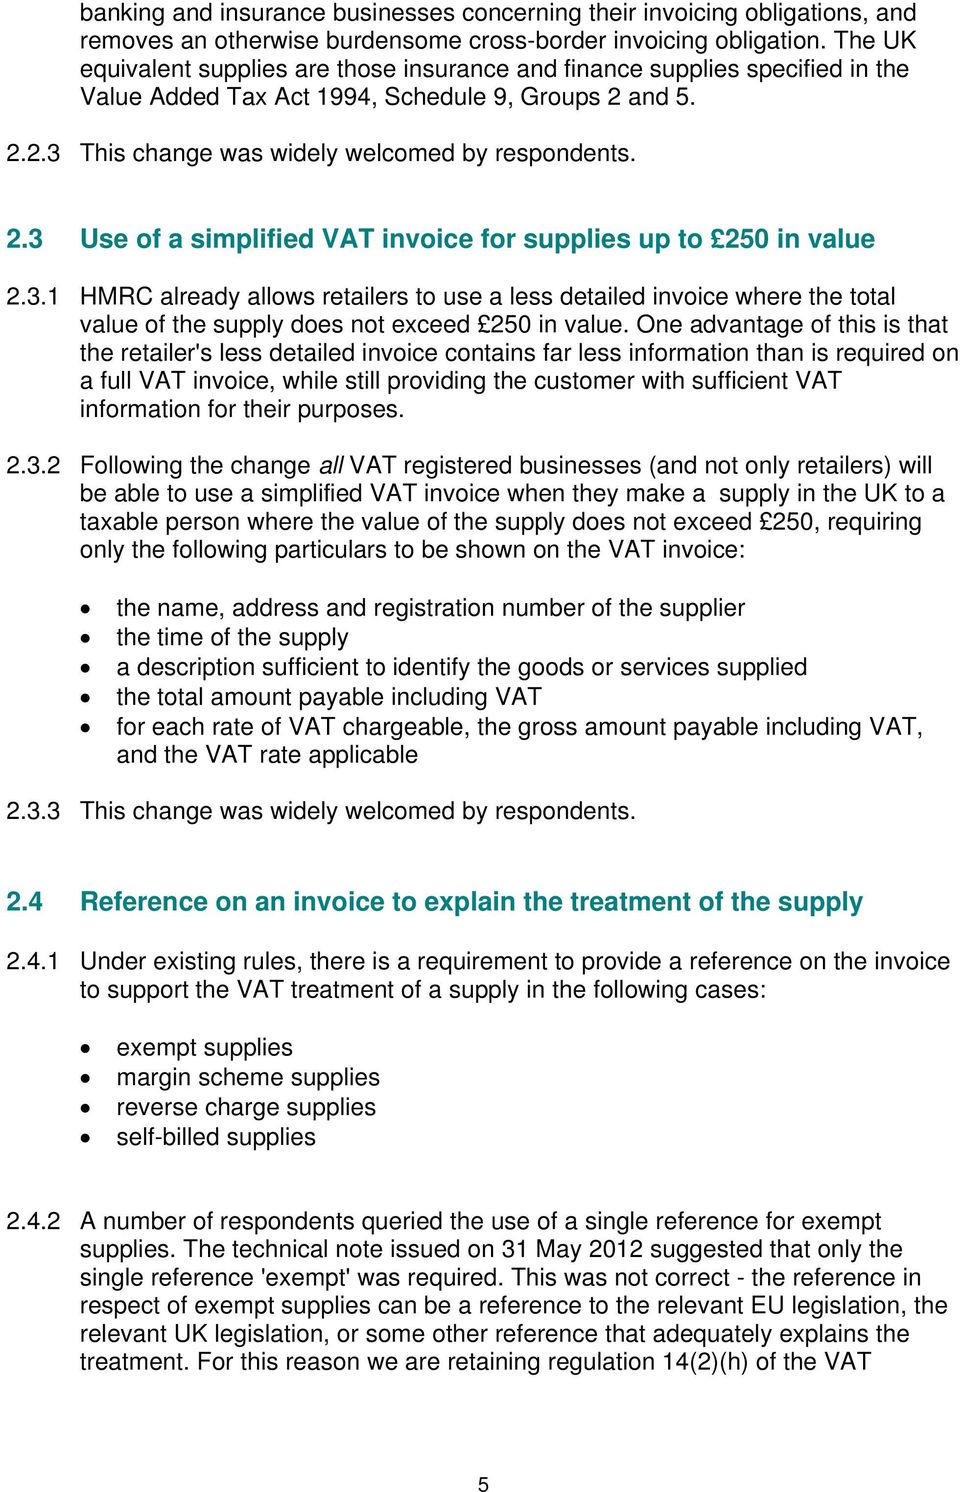 3.1 HMRC already allows retailers to use a less detailed invoice where the total value of the supply does not exceed 250 in value.